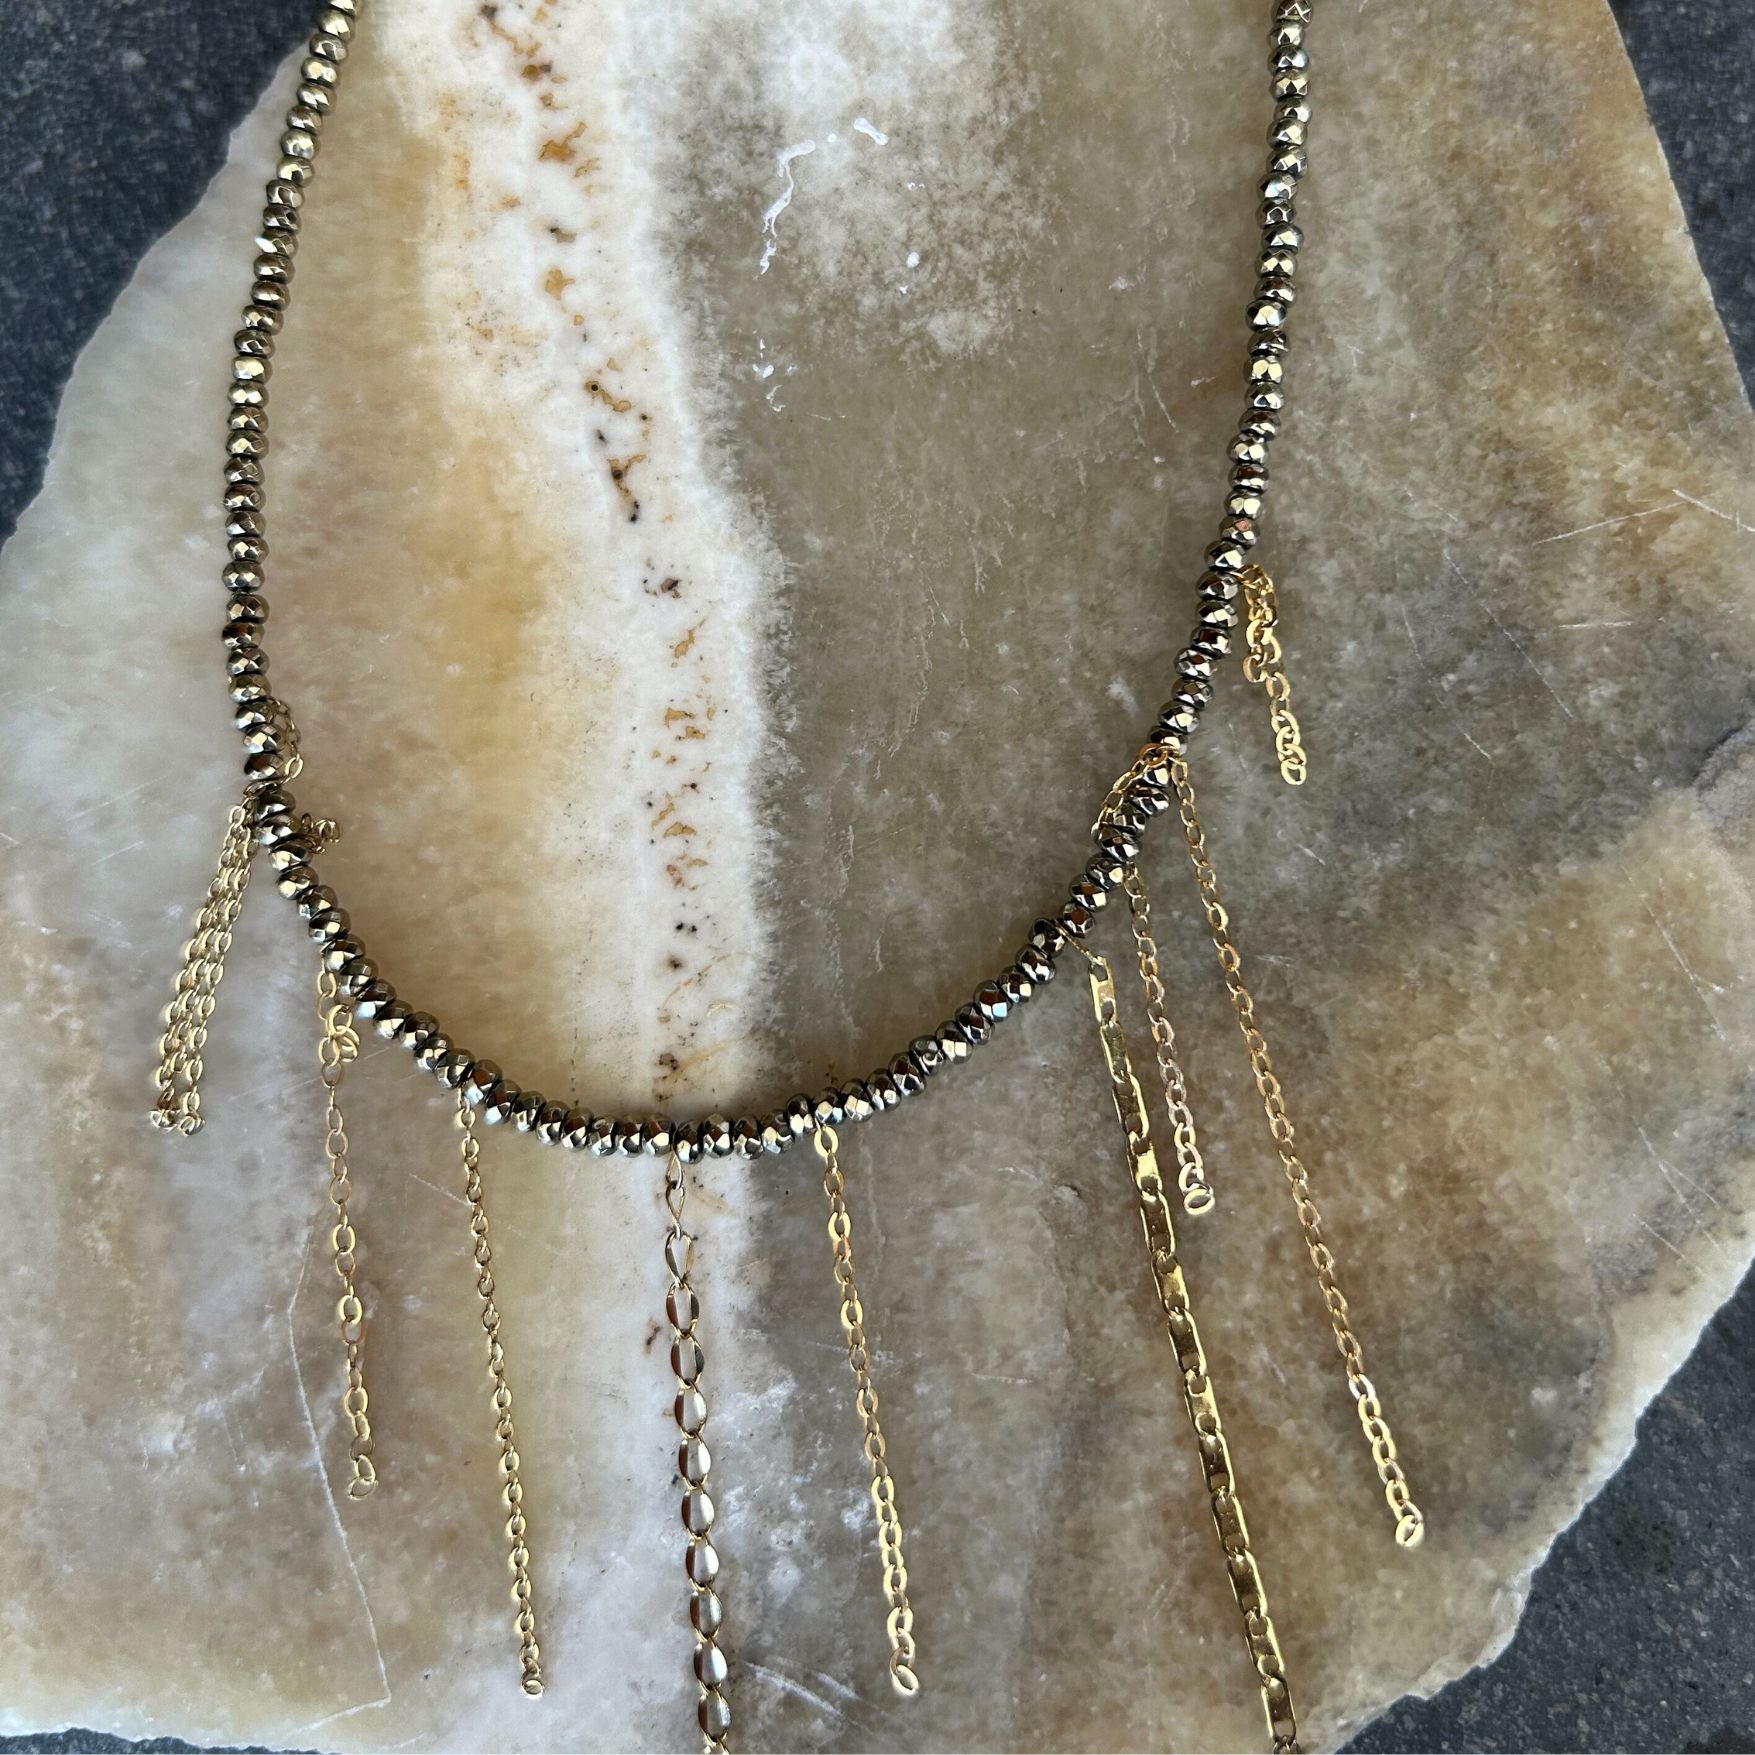 Pyrite Hanging Chain Necklace